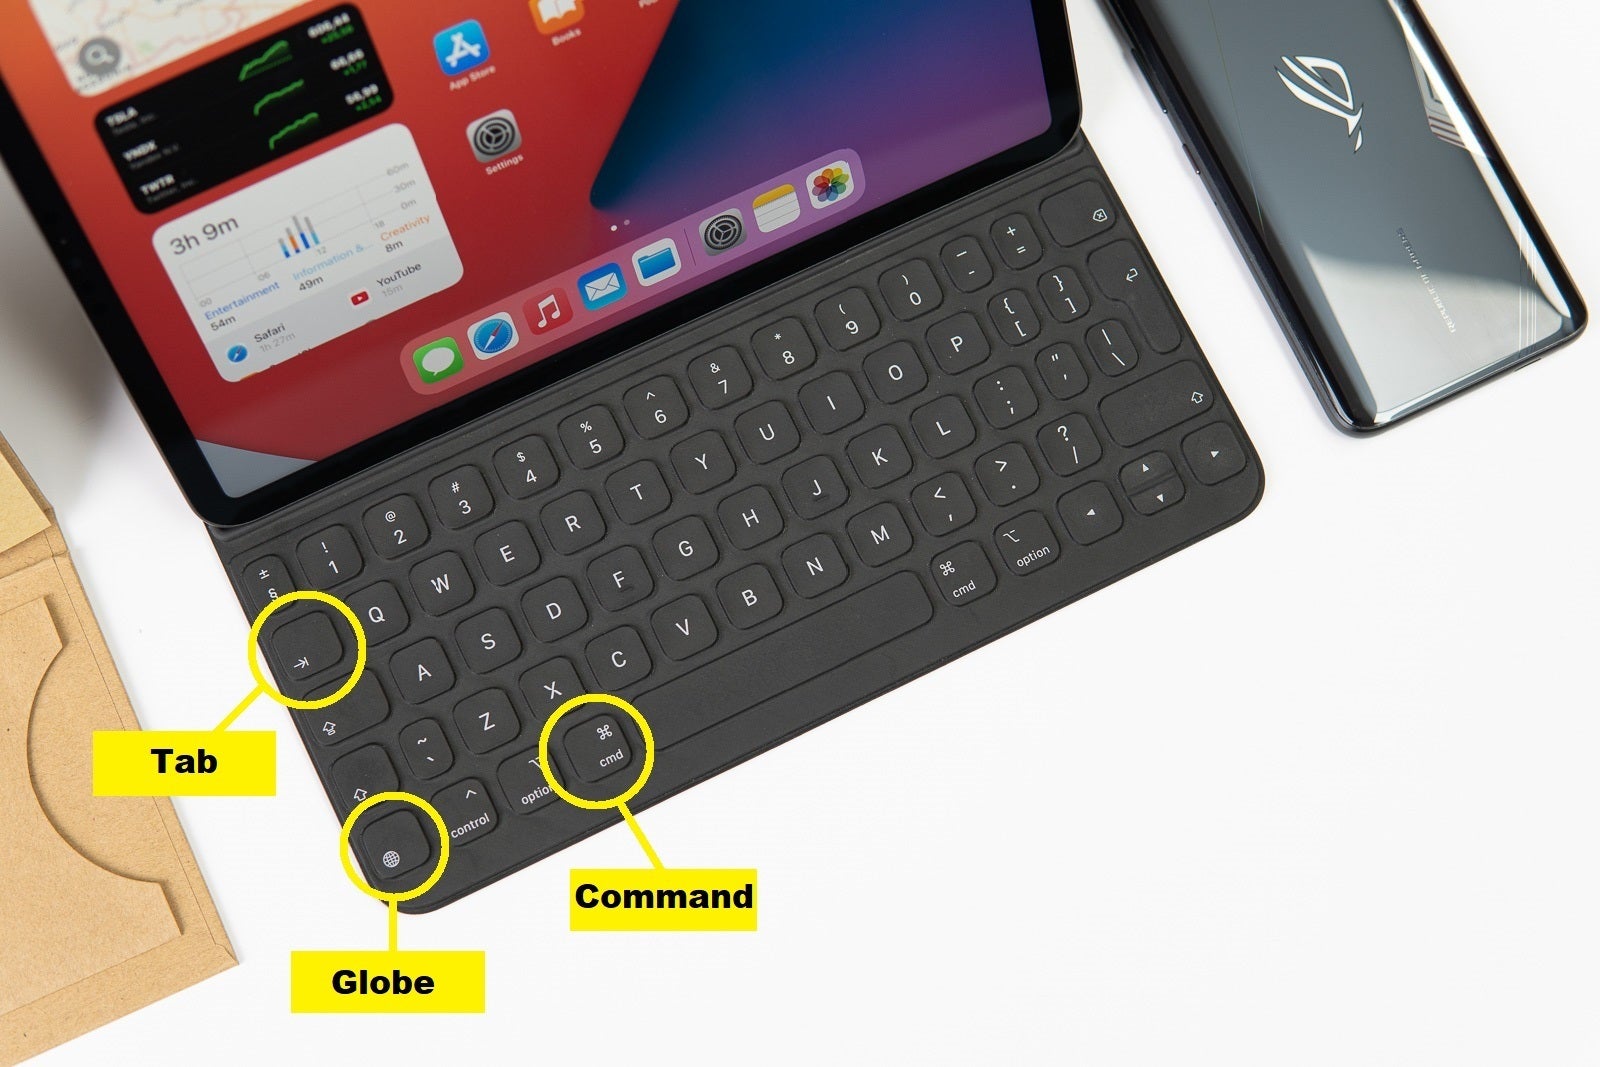 In case you don't know them, these are the Command, Tab and Globe keys we're talking about - Become an iPad pro: Must-know iPad tips and tricks